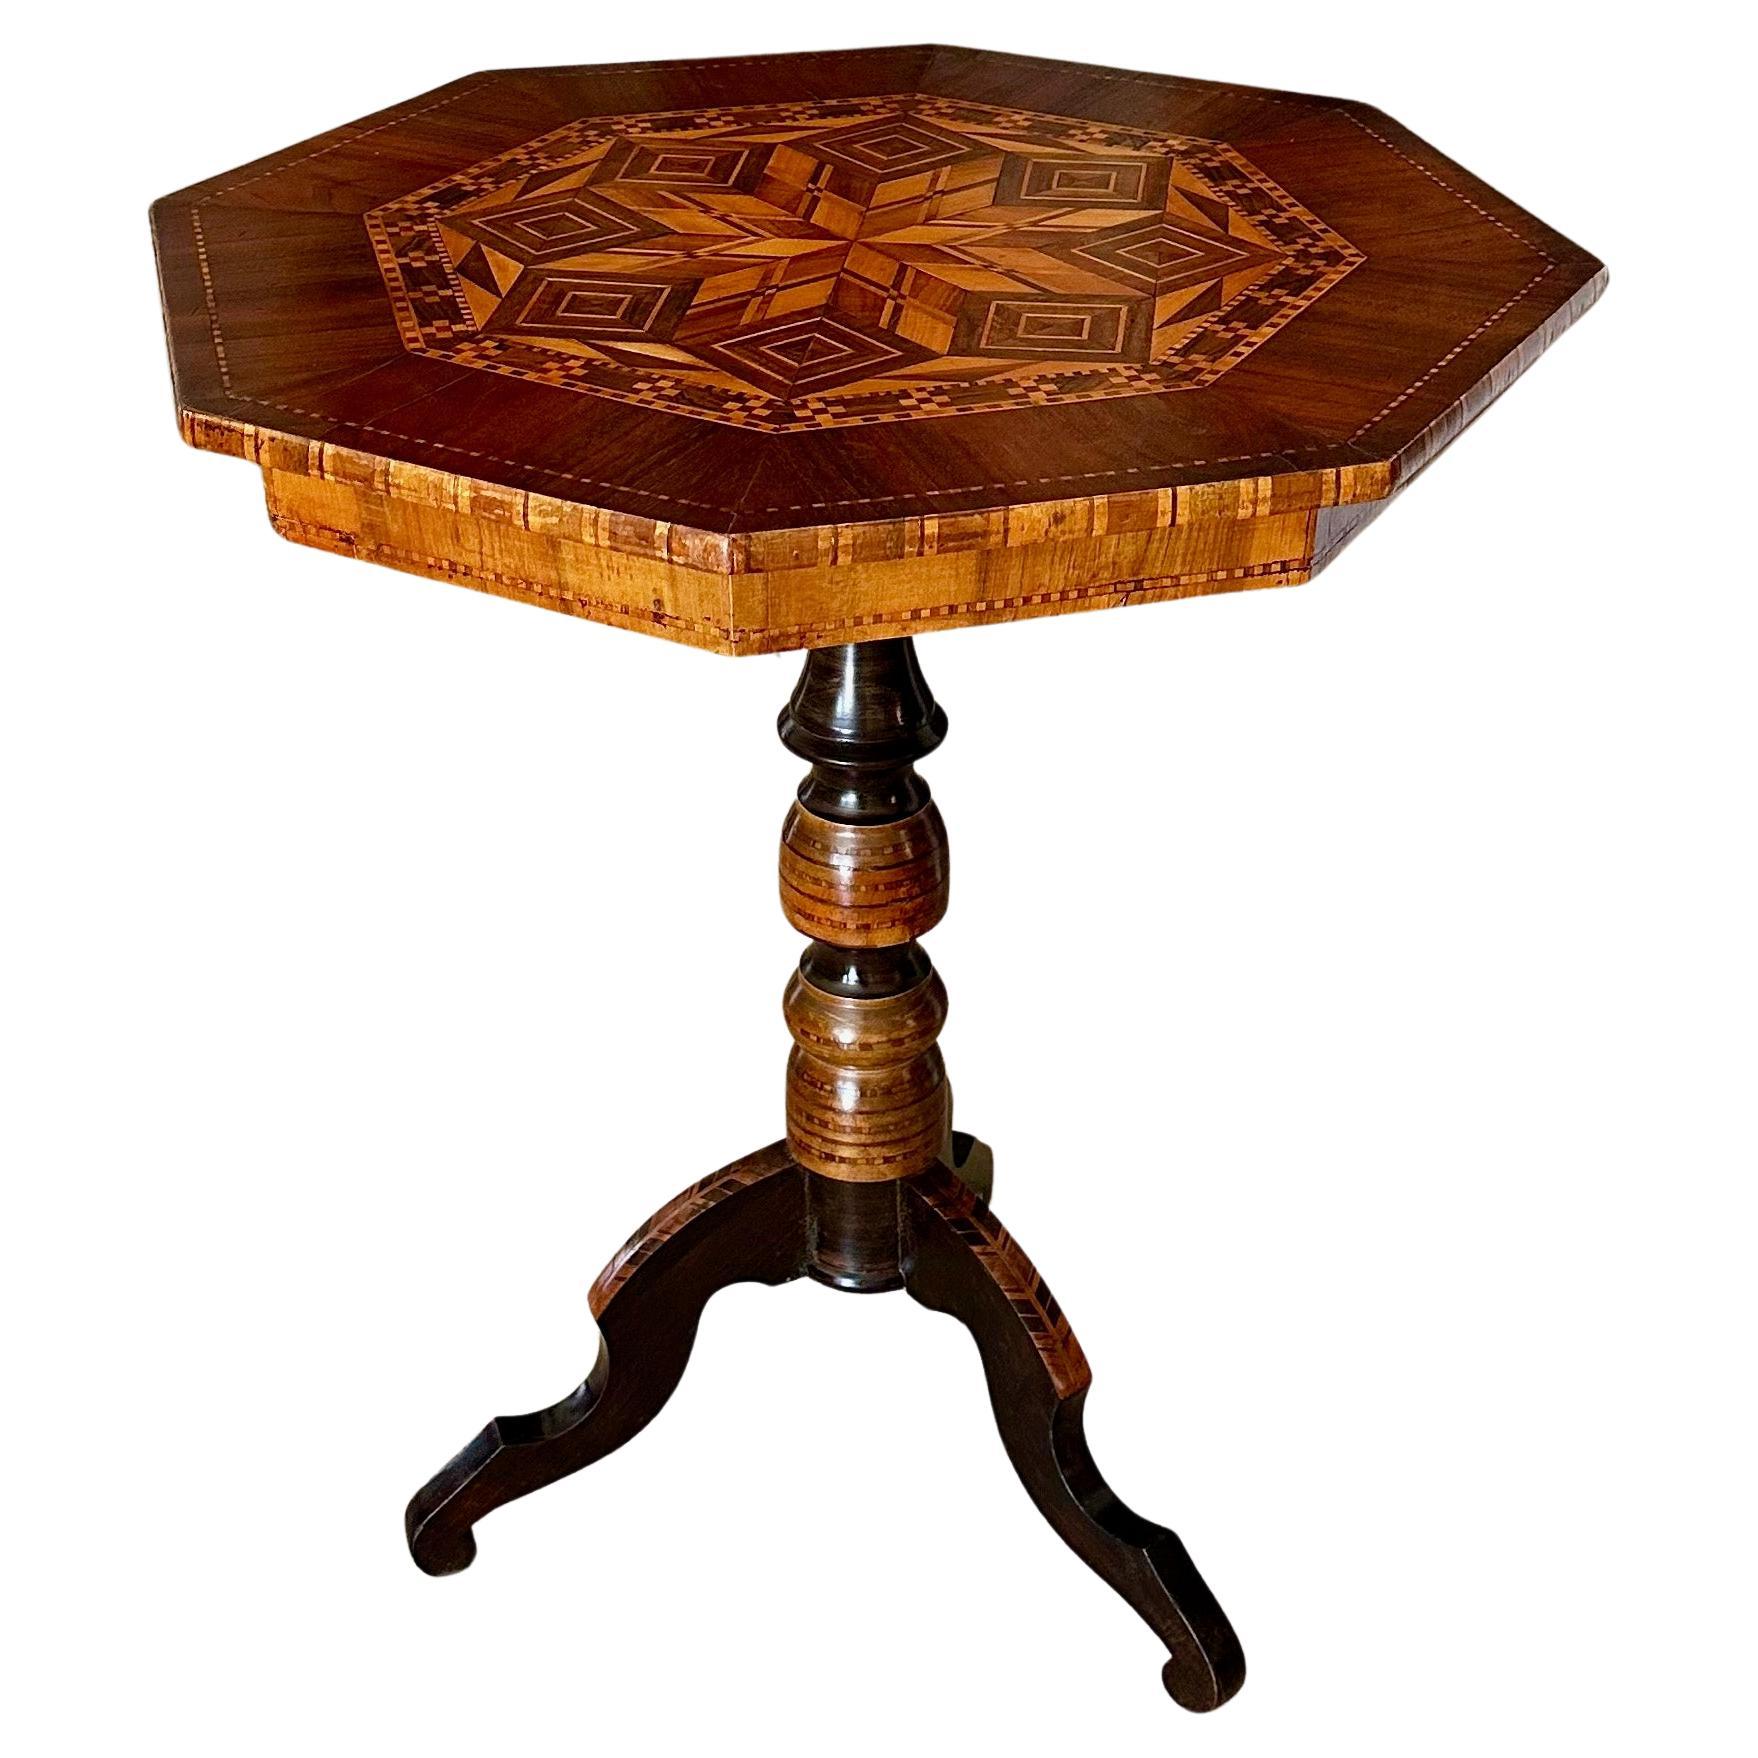 Table d'appoint italienne en marqueterie Sorrento, vers 1900